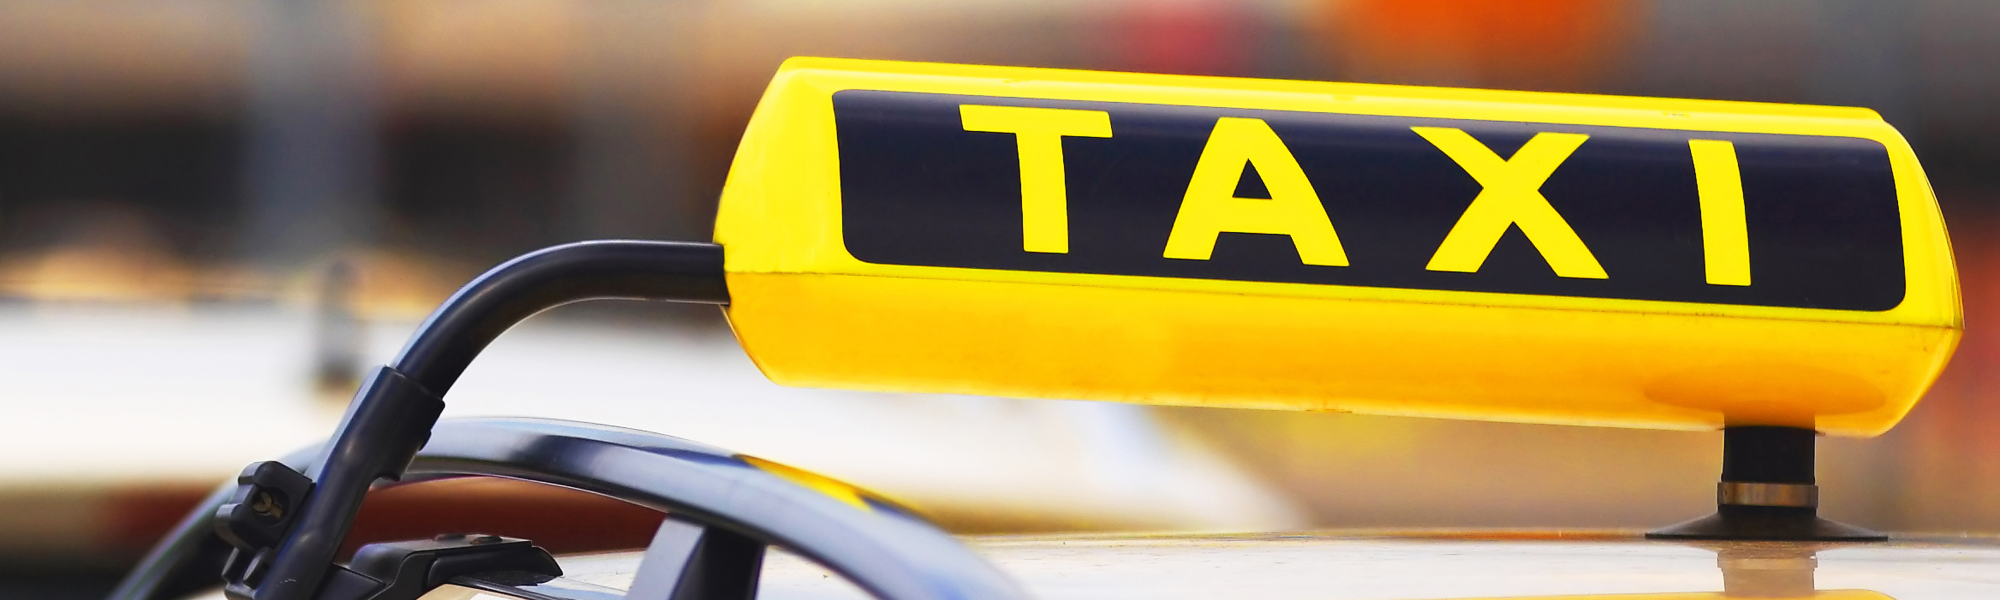 How much do you know about taxis? In the second article of a two-part series, four IRU taxi members uncover the challenges and misconceptions facing the sector and where it will be in five to ten years.